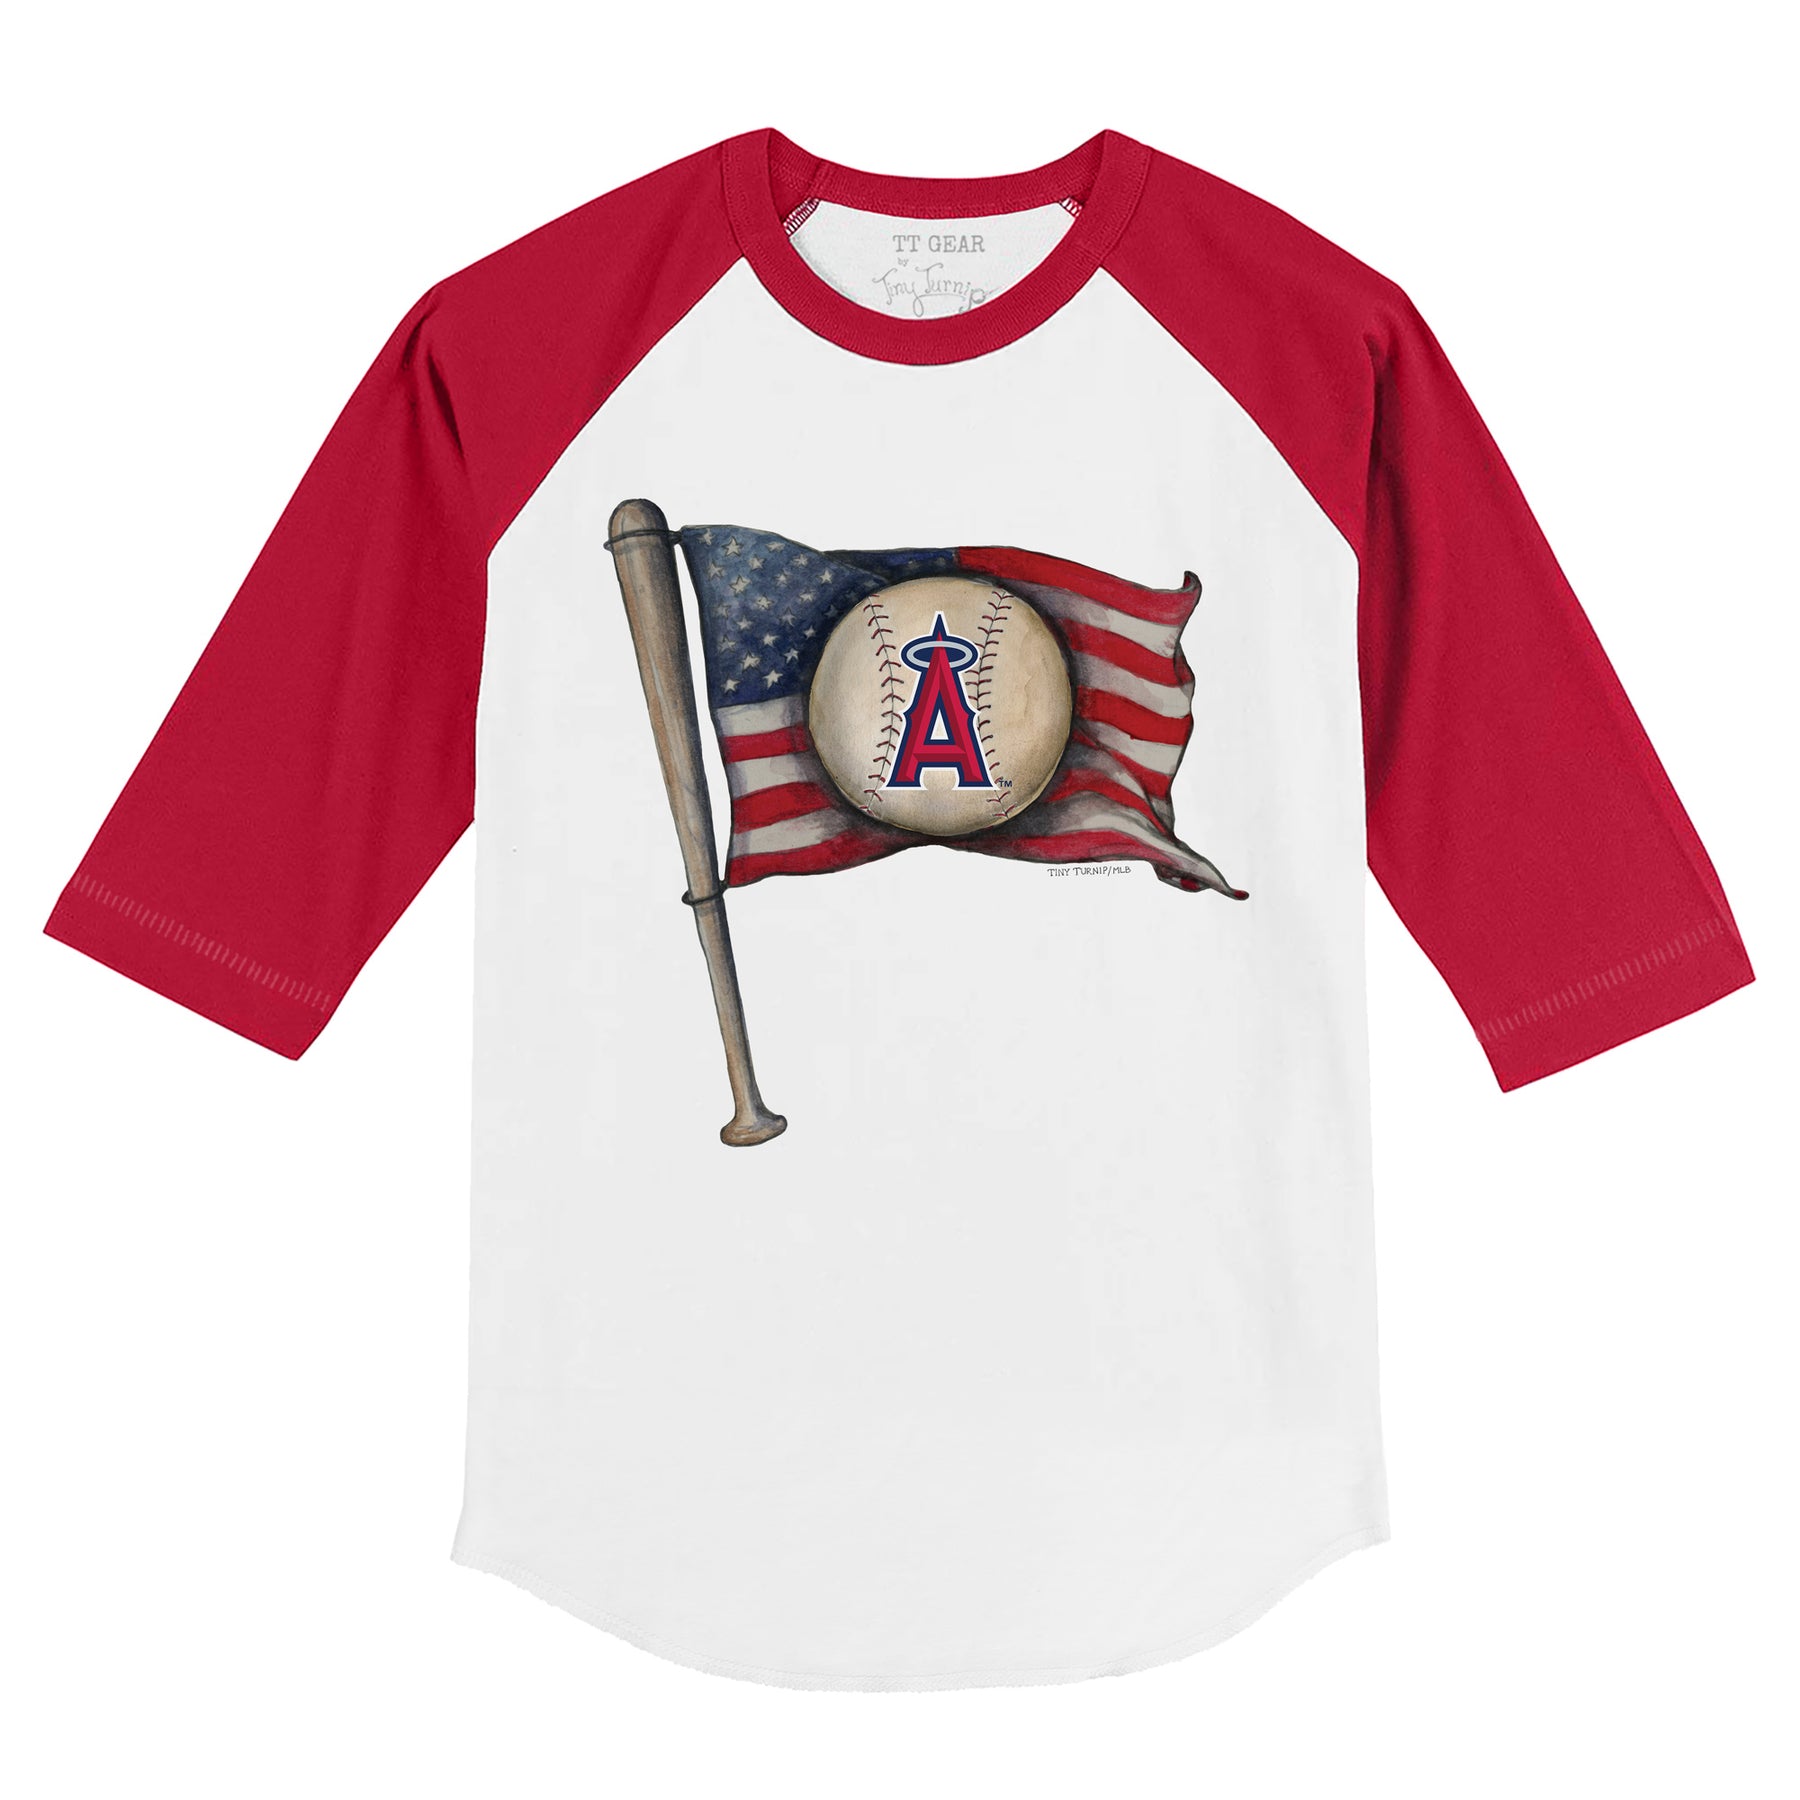 MLB 4th of July gear: Where to buy Stars & Stripes Yankees, Mets